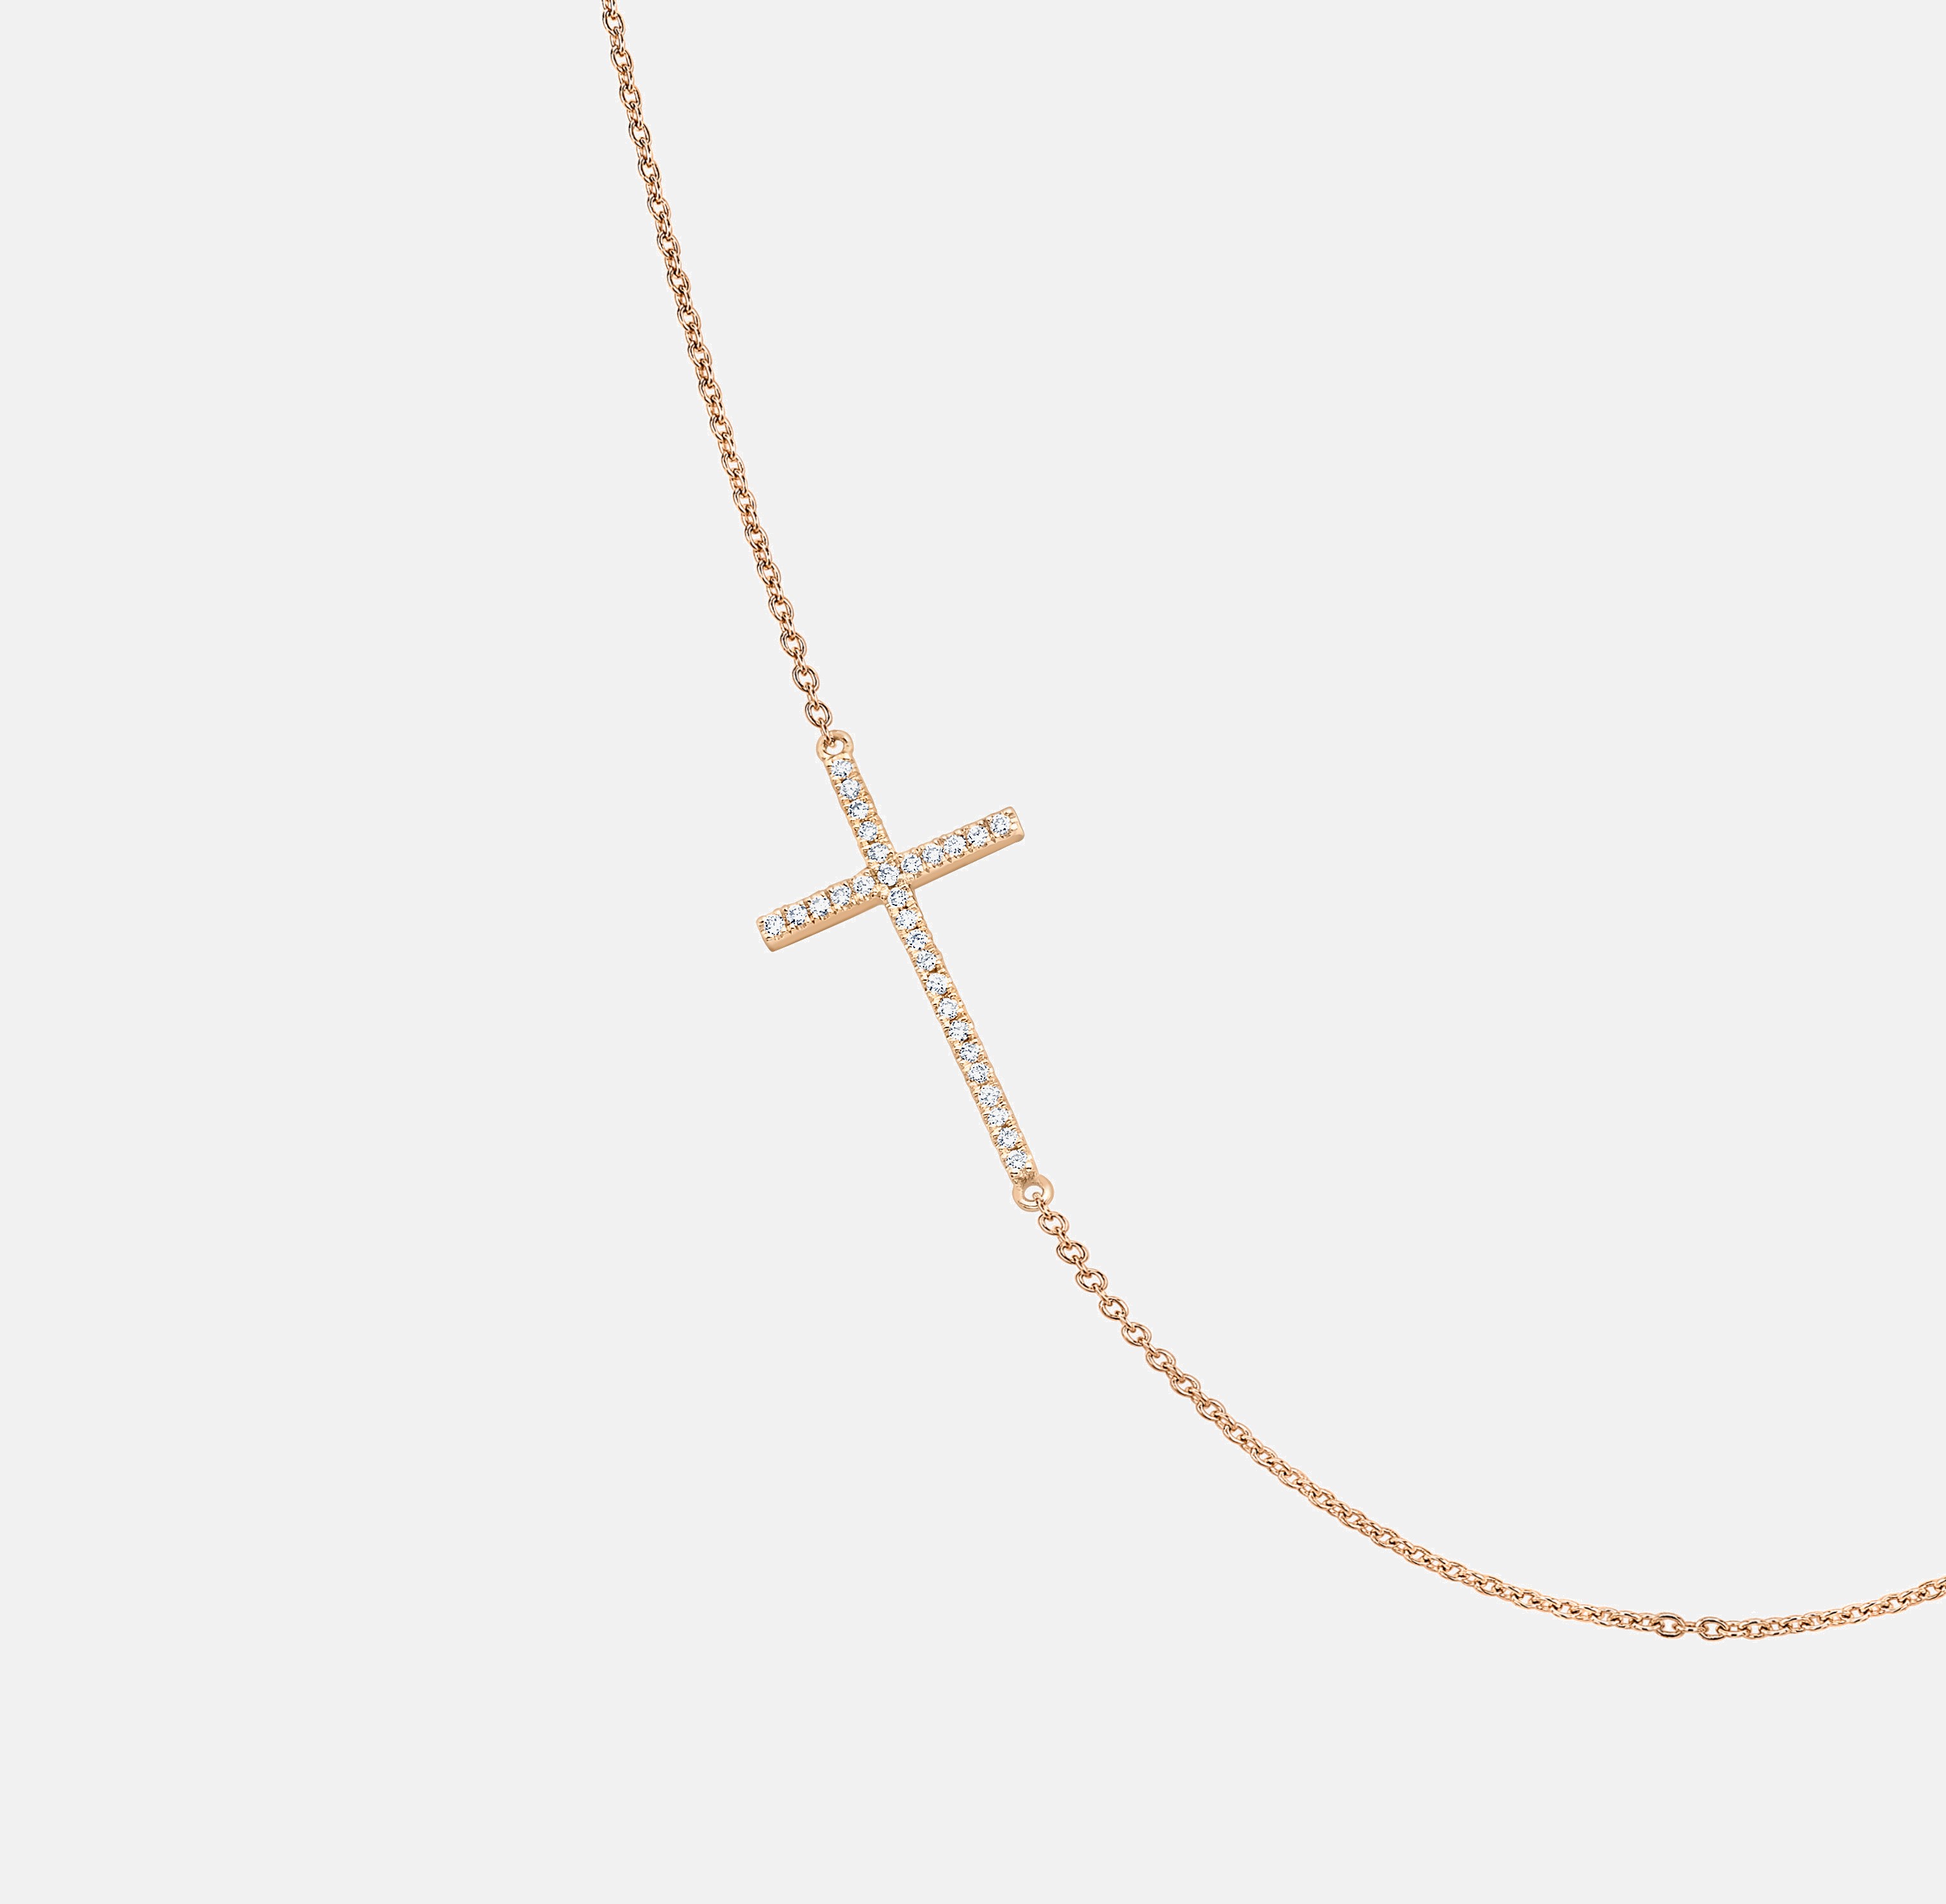 Small Sideways Cross Necklace - Caprices